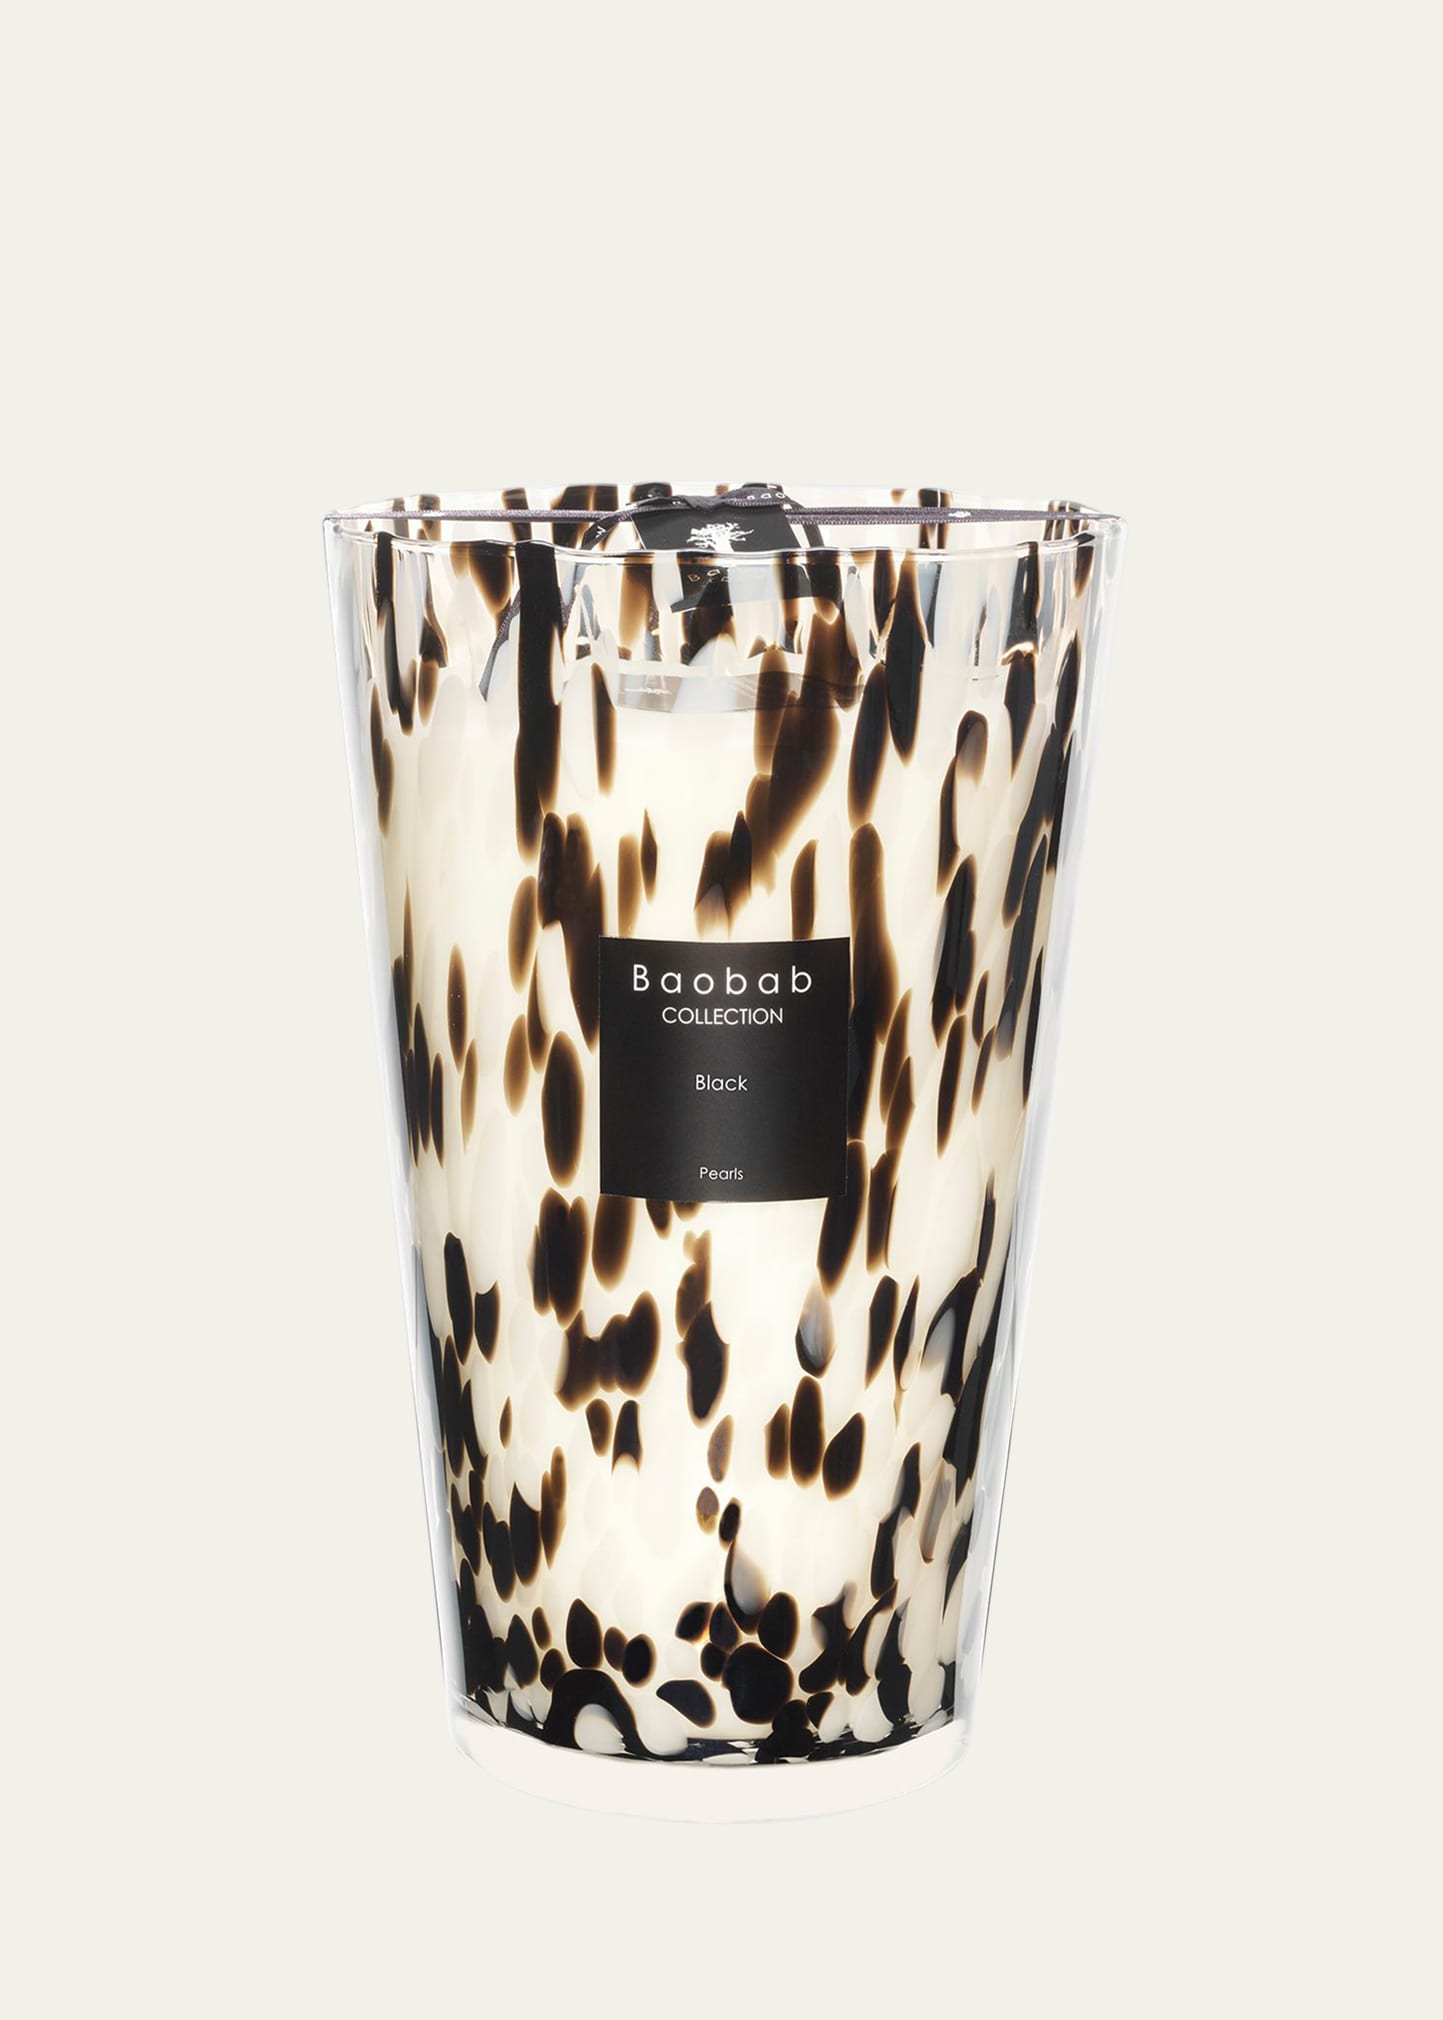 Baobab Collection Black Pearls Scented Candle, 13.8"